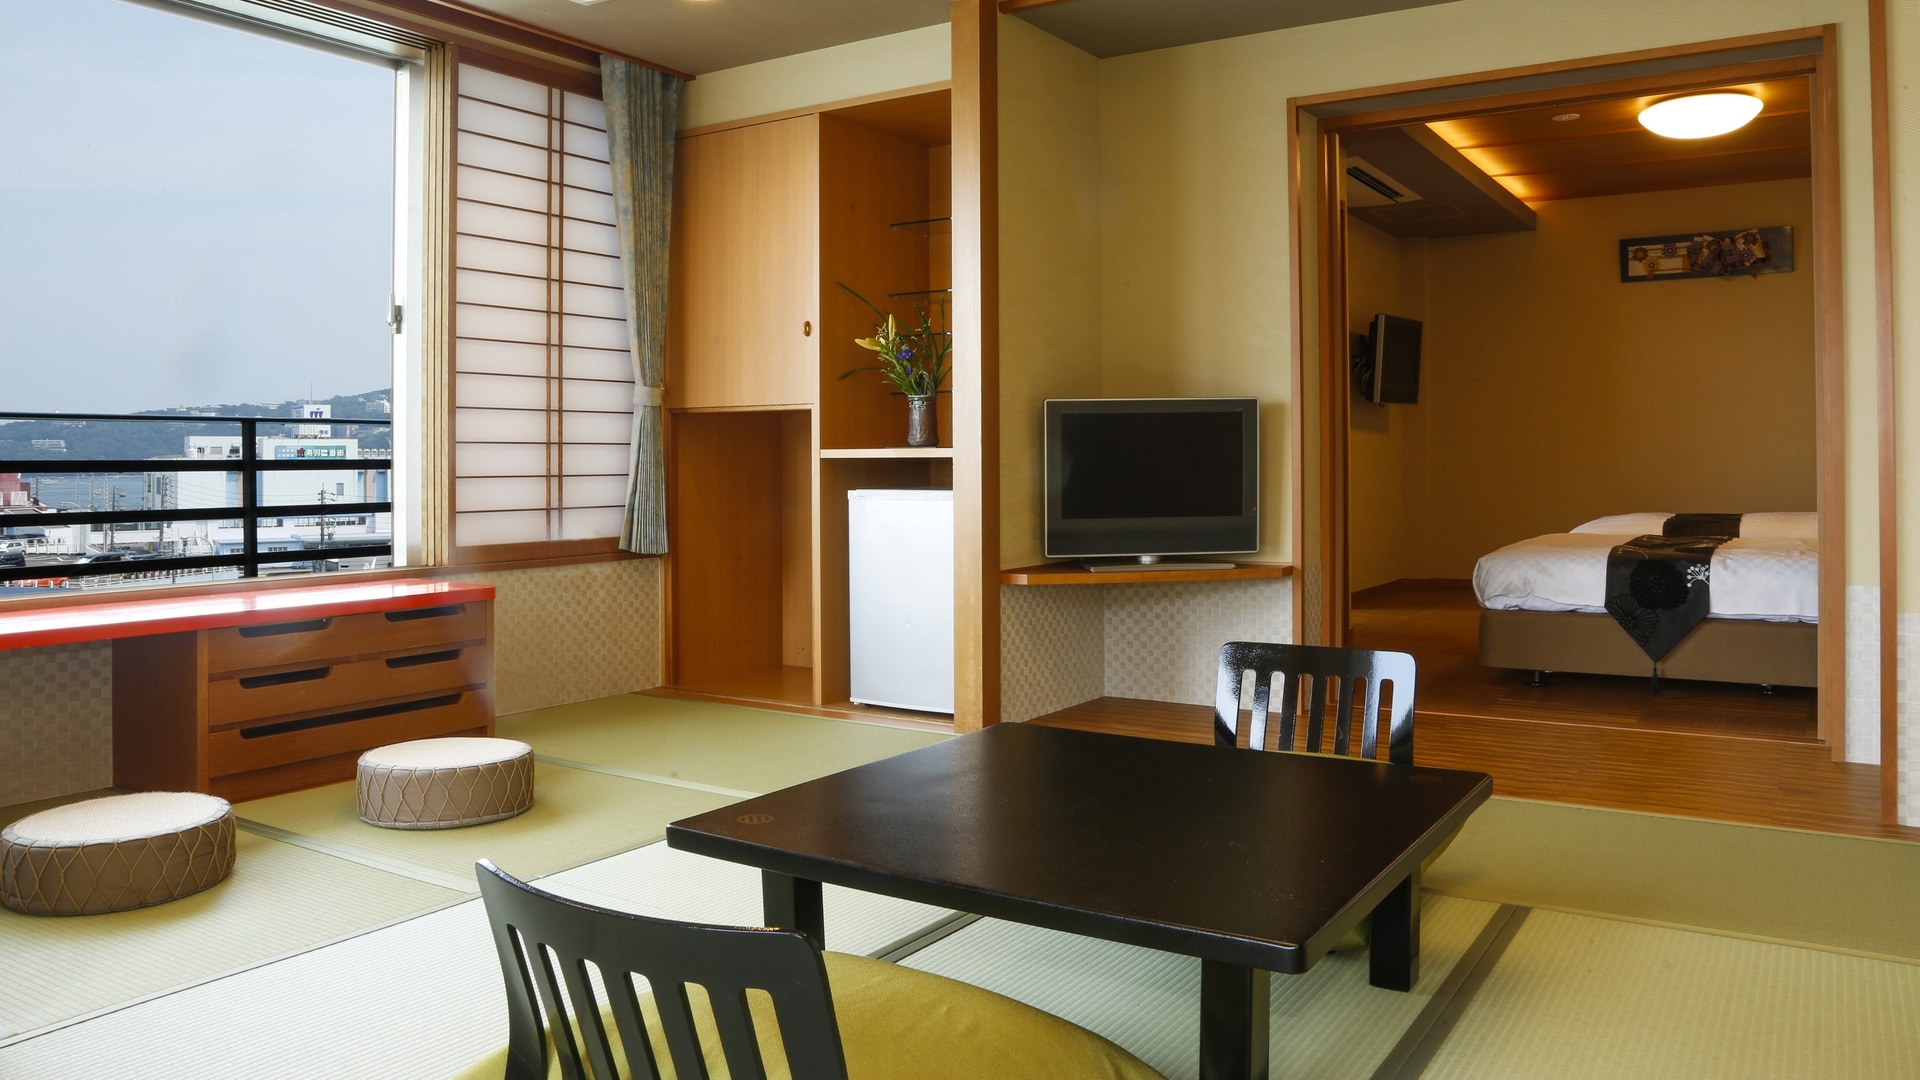 Deluxe Japanese and Western room (example) * The floor plan varies depending on the room.